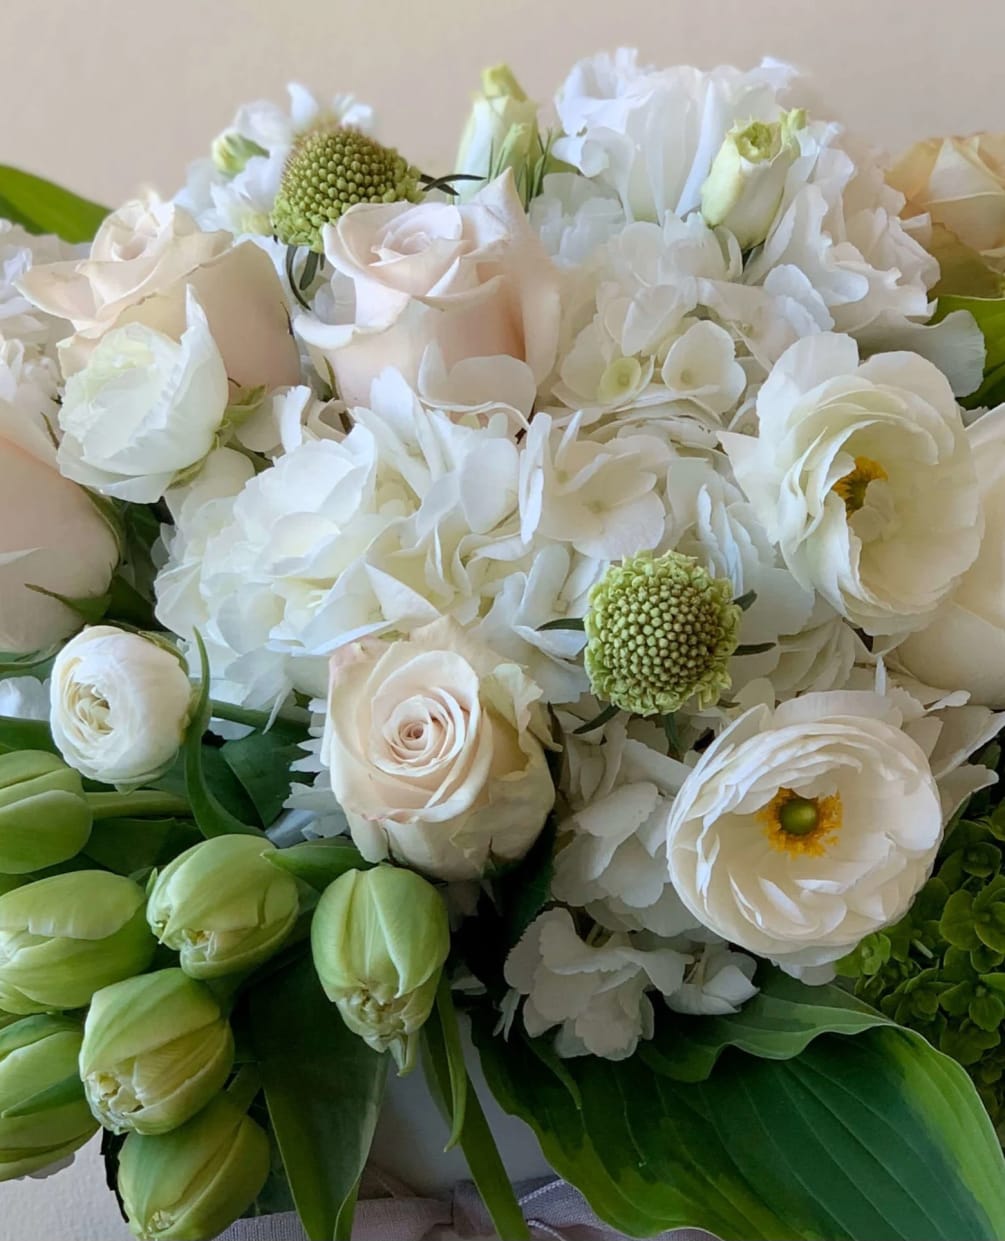 We will choose the freshest quality blooms in a neutral color palette.